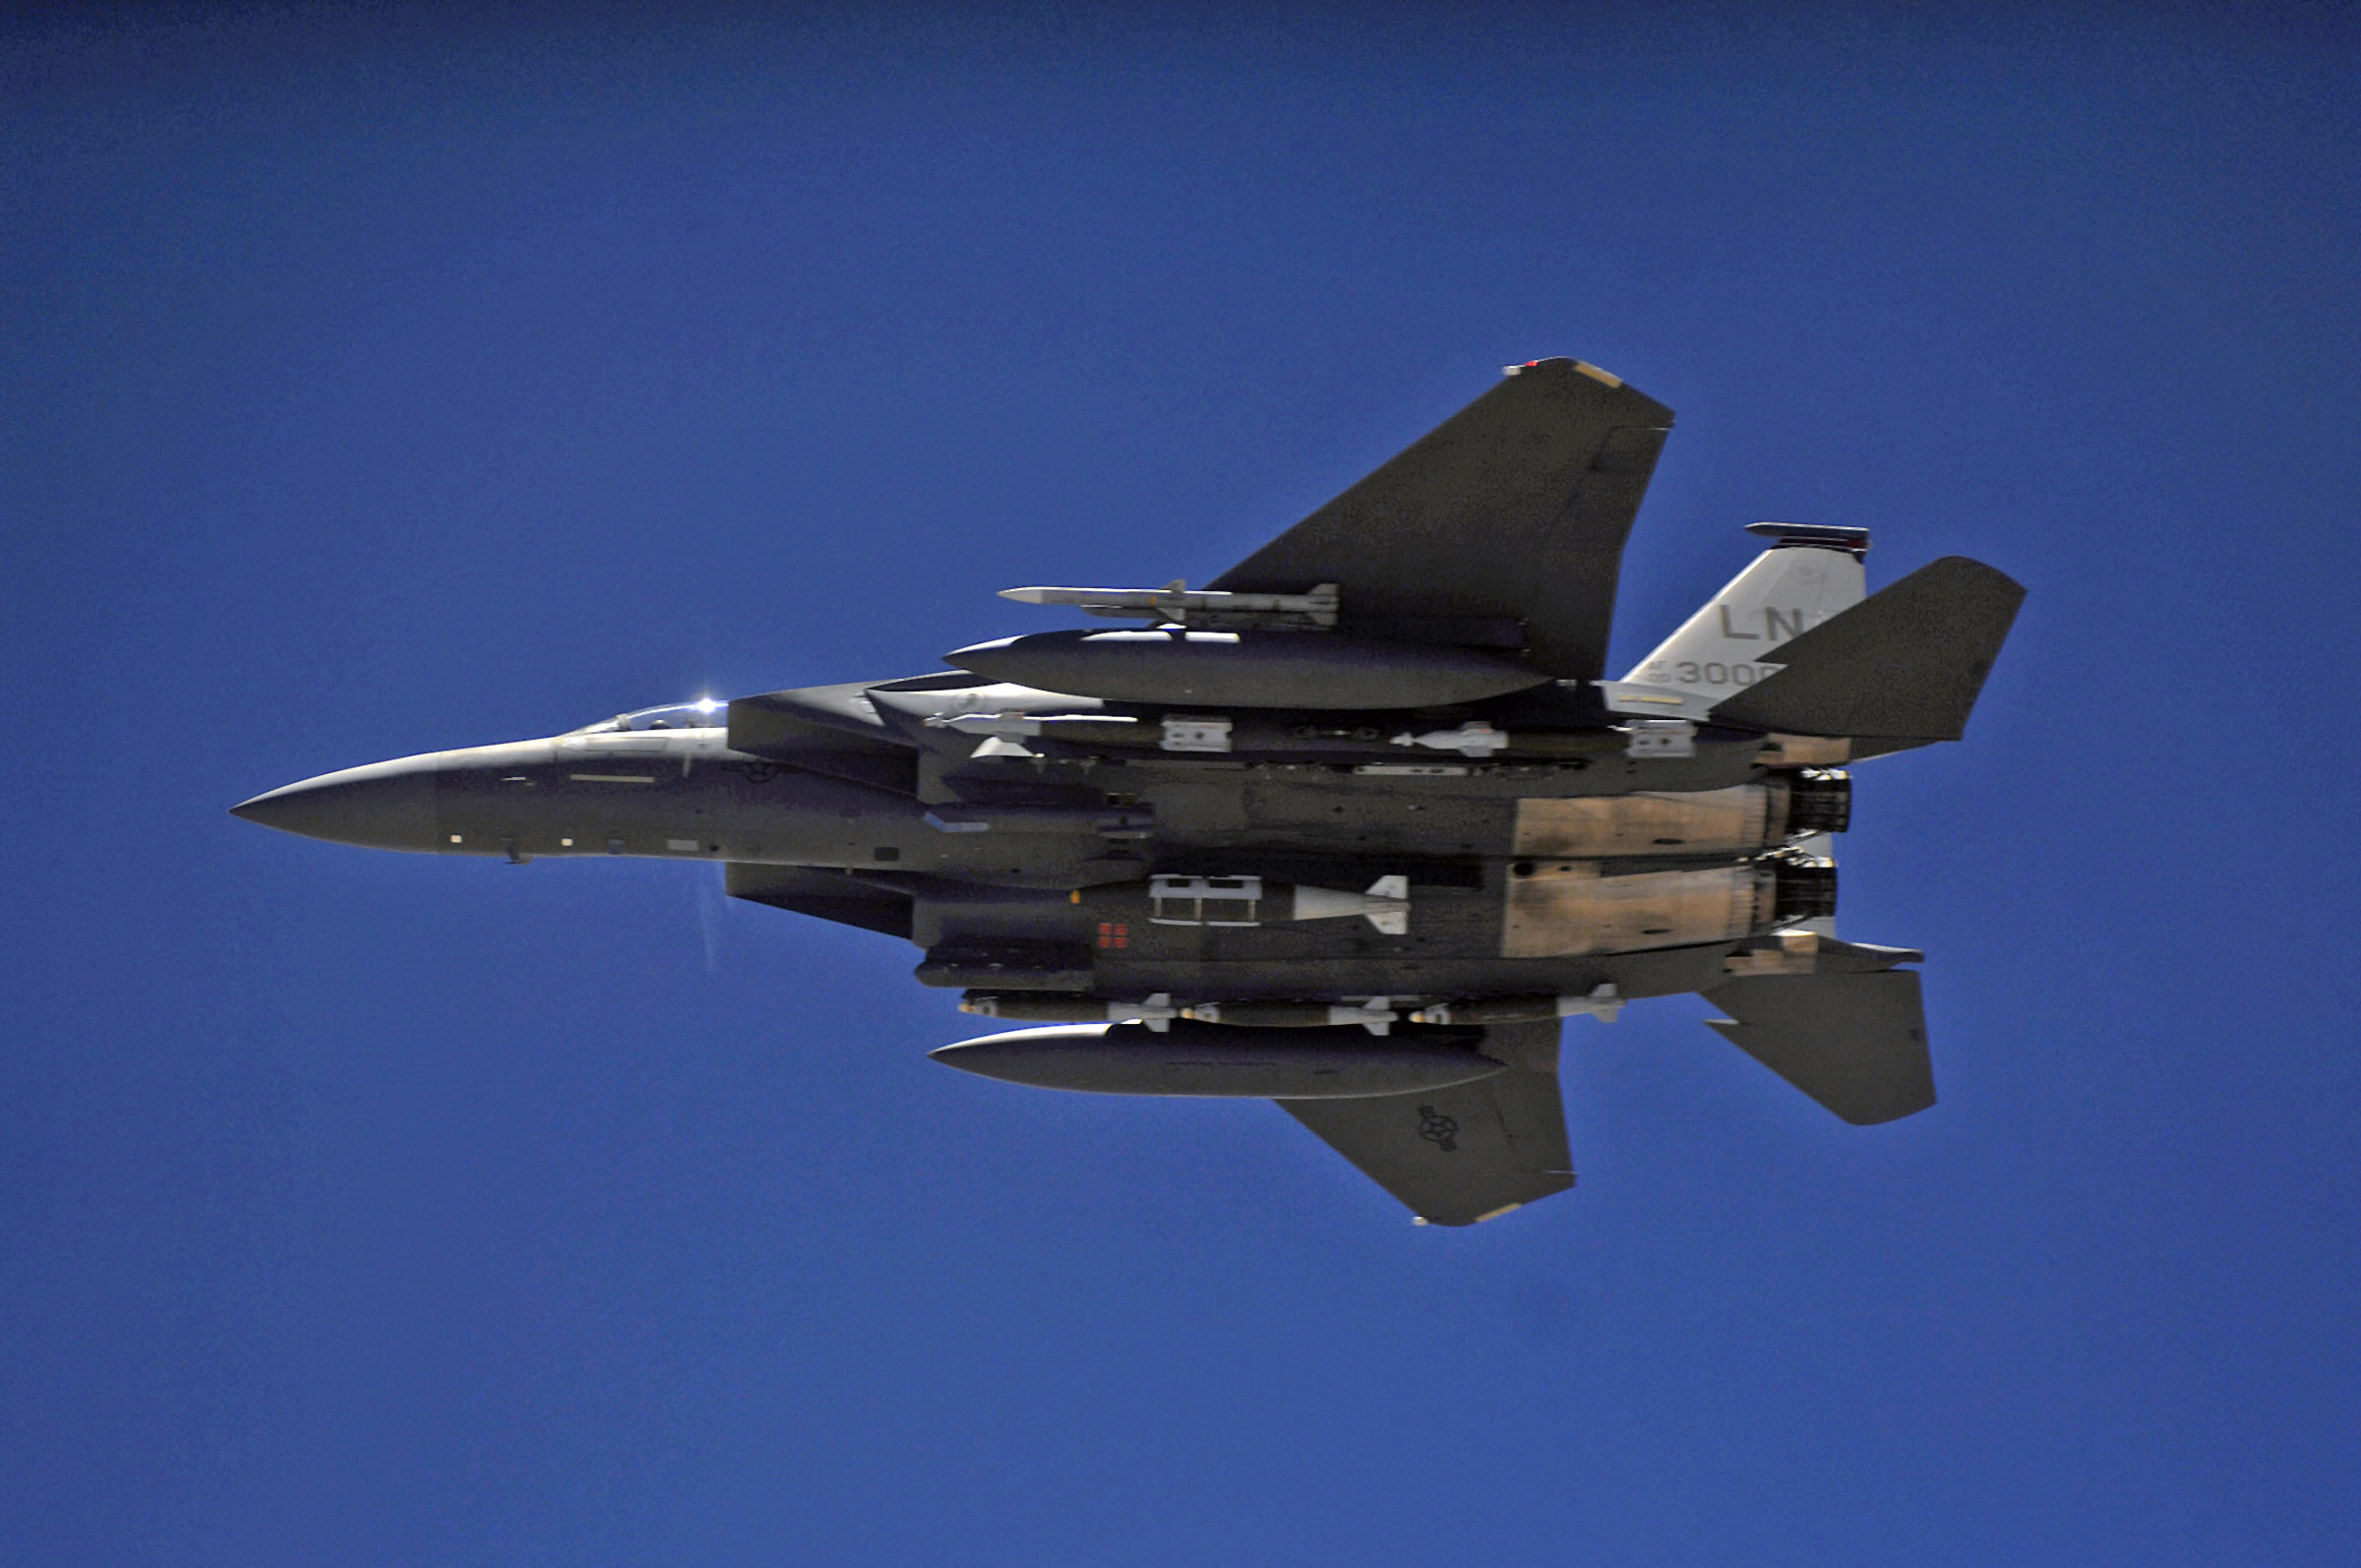 Figure 4: Lakenheath F-15E loaded for bear in OEF with 3 x GBU-38, 2 x GBU-12, 1 x GBU-31 (2000-lb.) 2 x AIM-120C, 2 x AIM-9M, two external fuel tanks, LANTIRN nav pod and Sniper targeting pod. It is likely that it has already expended two GBU-12s. (U.S. Air Force photo/Master Sgt. Andy Dunaway)